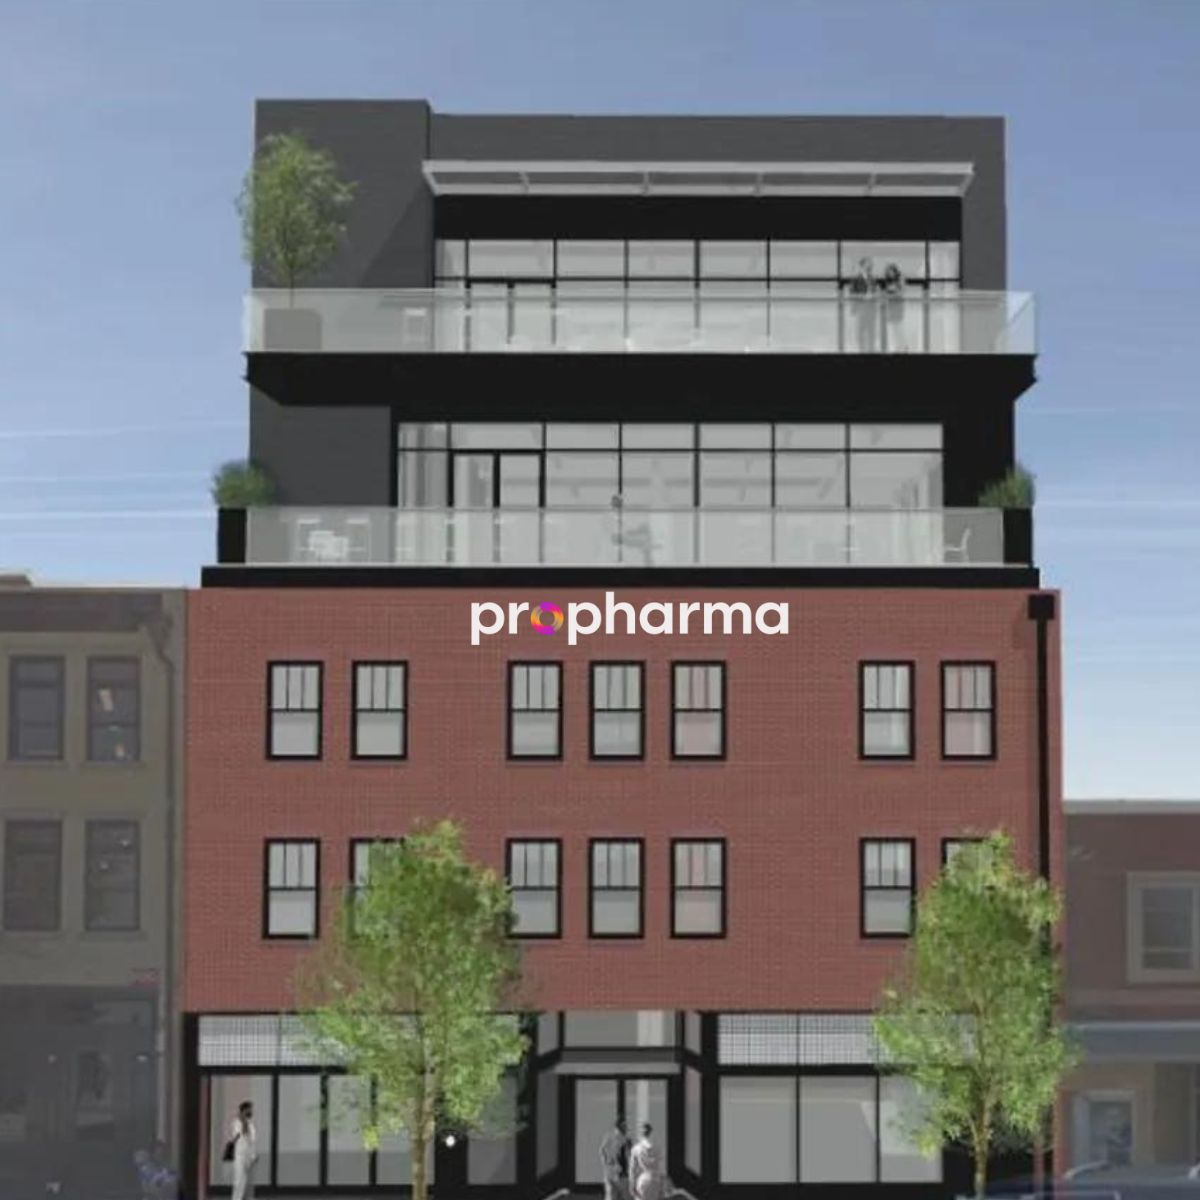 The new global headquarters offers ample room for expansion, accommodating ProPharma’s future growth plan of adding approximately 75-100 new roles to the Raleigh, NC headquarters.